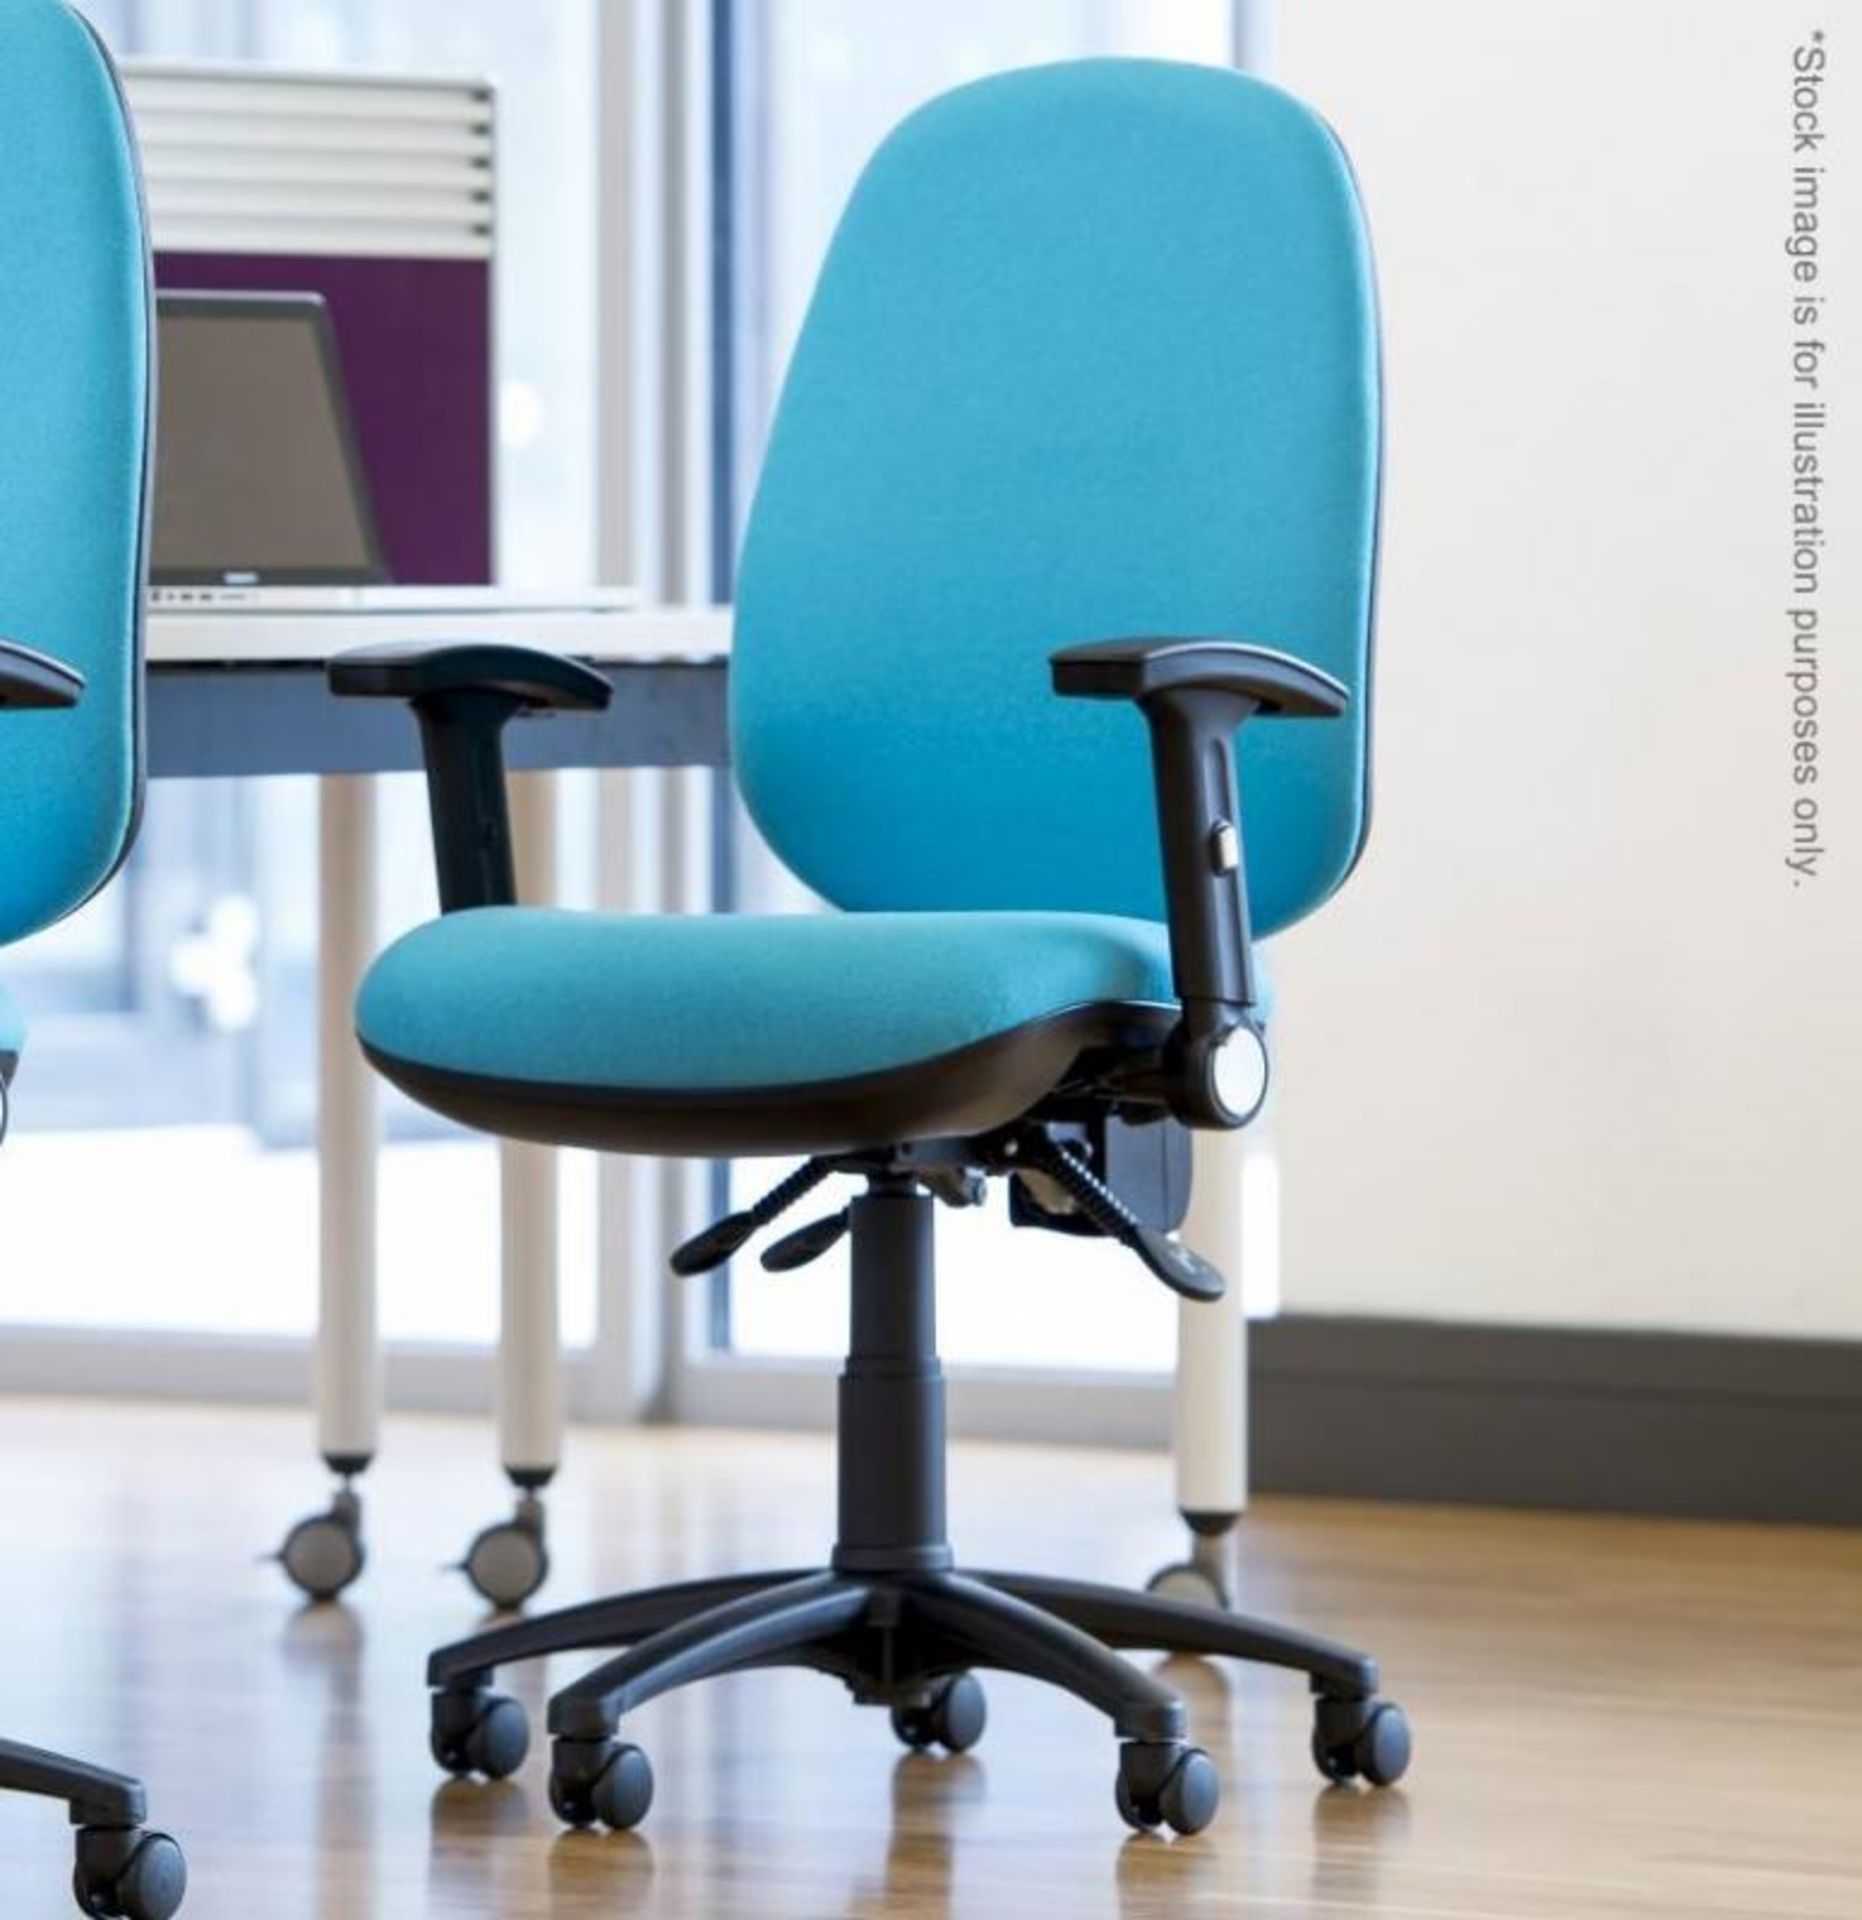 4 x OCEE Design ‘TICK’ Premium High Back Office Chairs In Turquoise With Adjustable Height And Synch